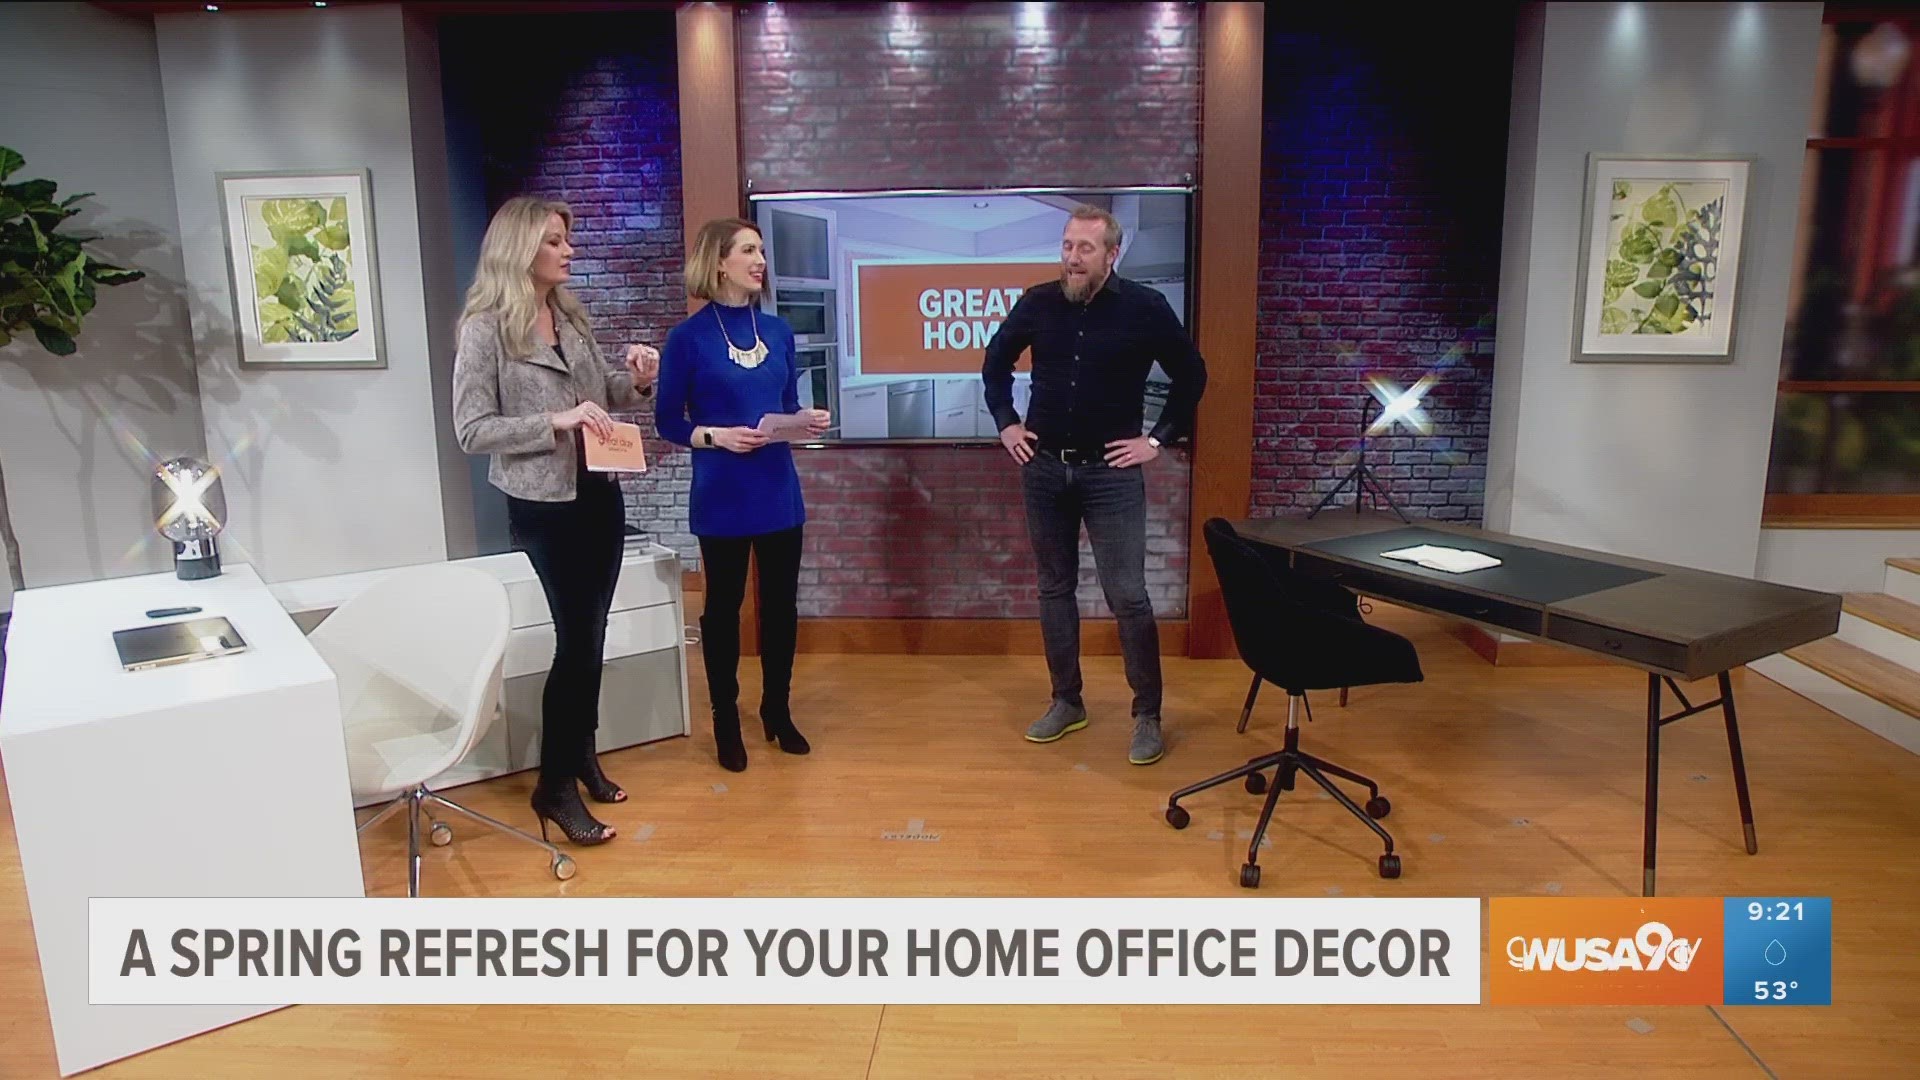 Tim Machenaud, owner of BoConcept in Georgetown, offers ideas for a home office Spring refresh.